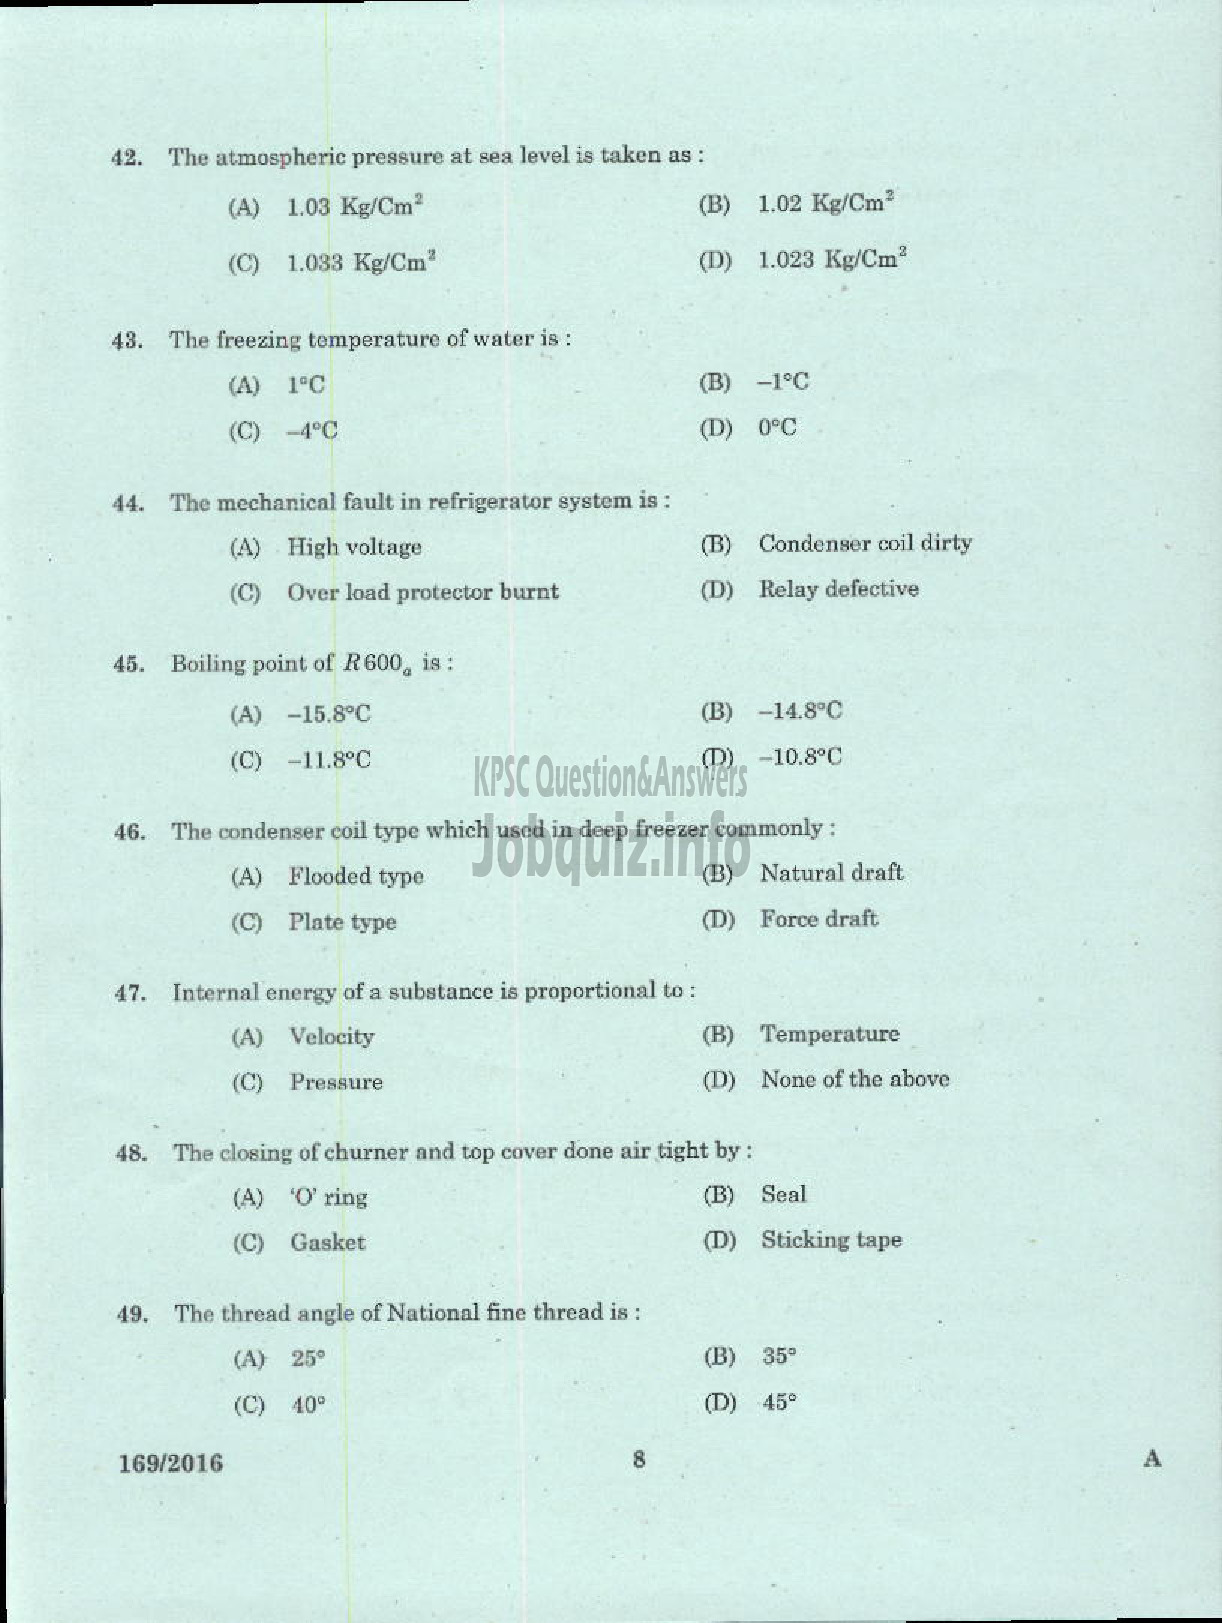 Kerala PSC Question Paper - TRADESMAN REFRIGERATION AND AIR CONDITIONING TECHNICAL EDUCATION-6